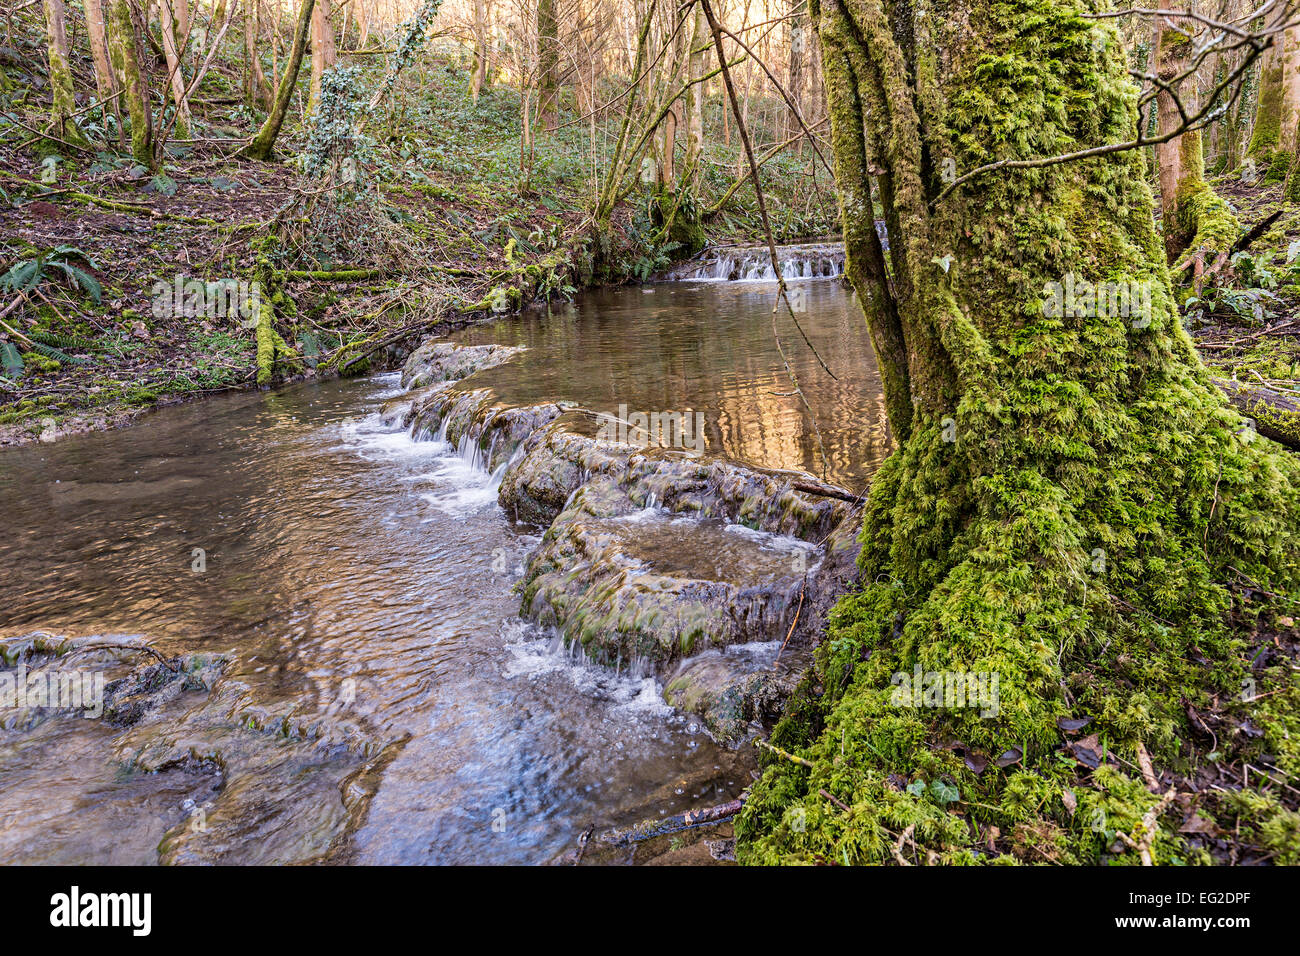 Stream with tufa dams and moss on tree, Slade Bottom valley, St Briavels, Gloucestershire, England, UK Stock Photo